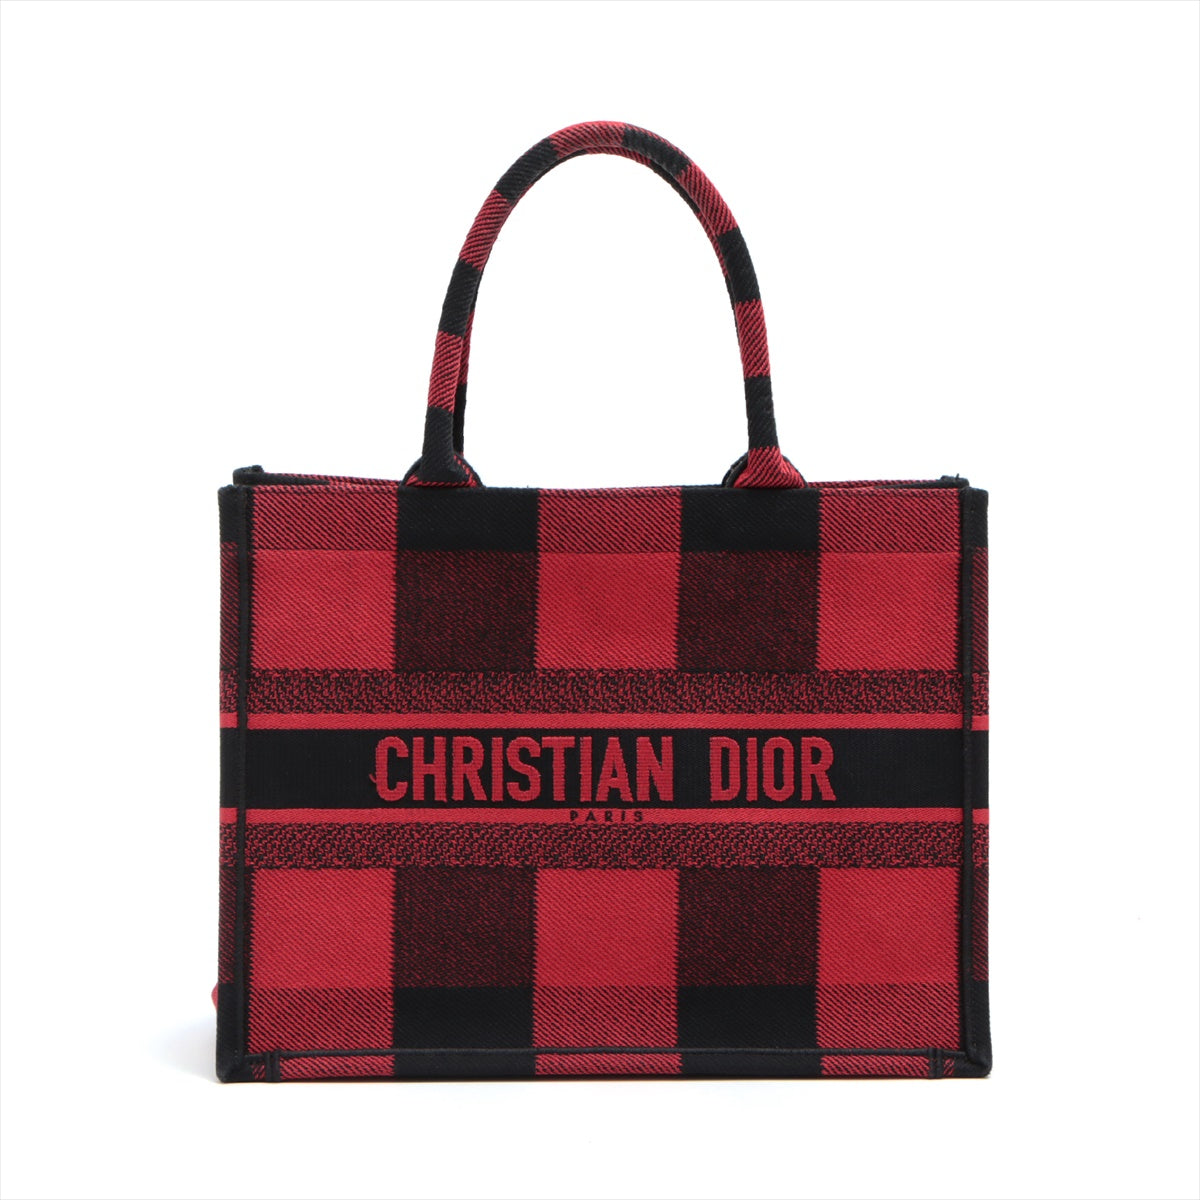 Christian Dior Book Tote canvass Tote bag Red